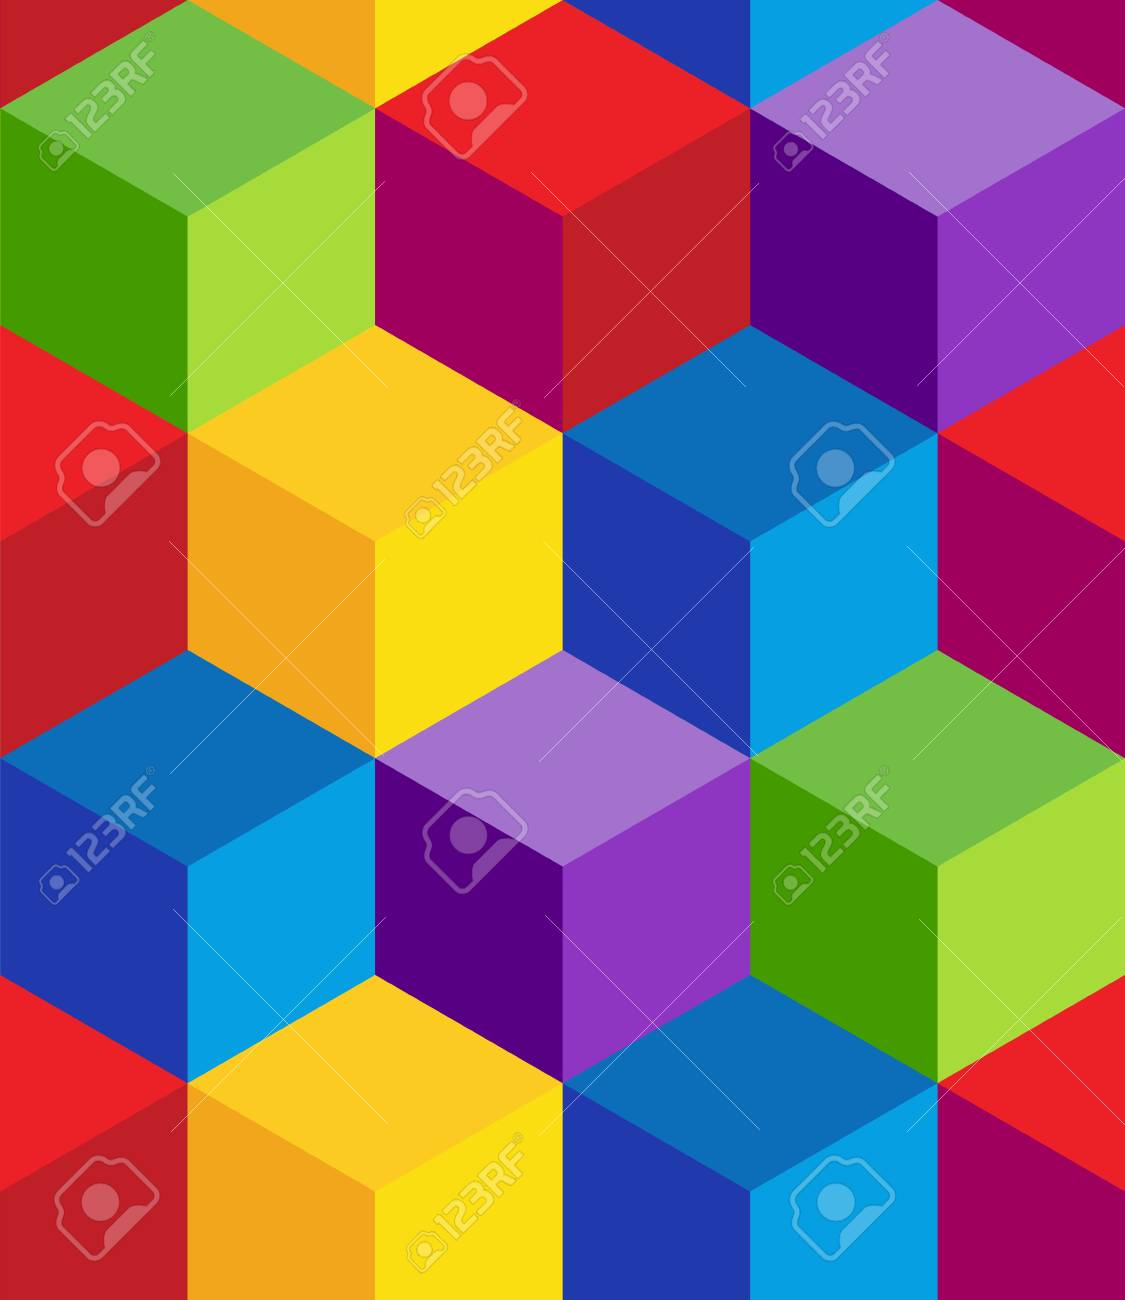 An Image Of A Seamless Repeating Rainbow 3d Cube Wallpaper Pattern